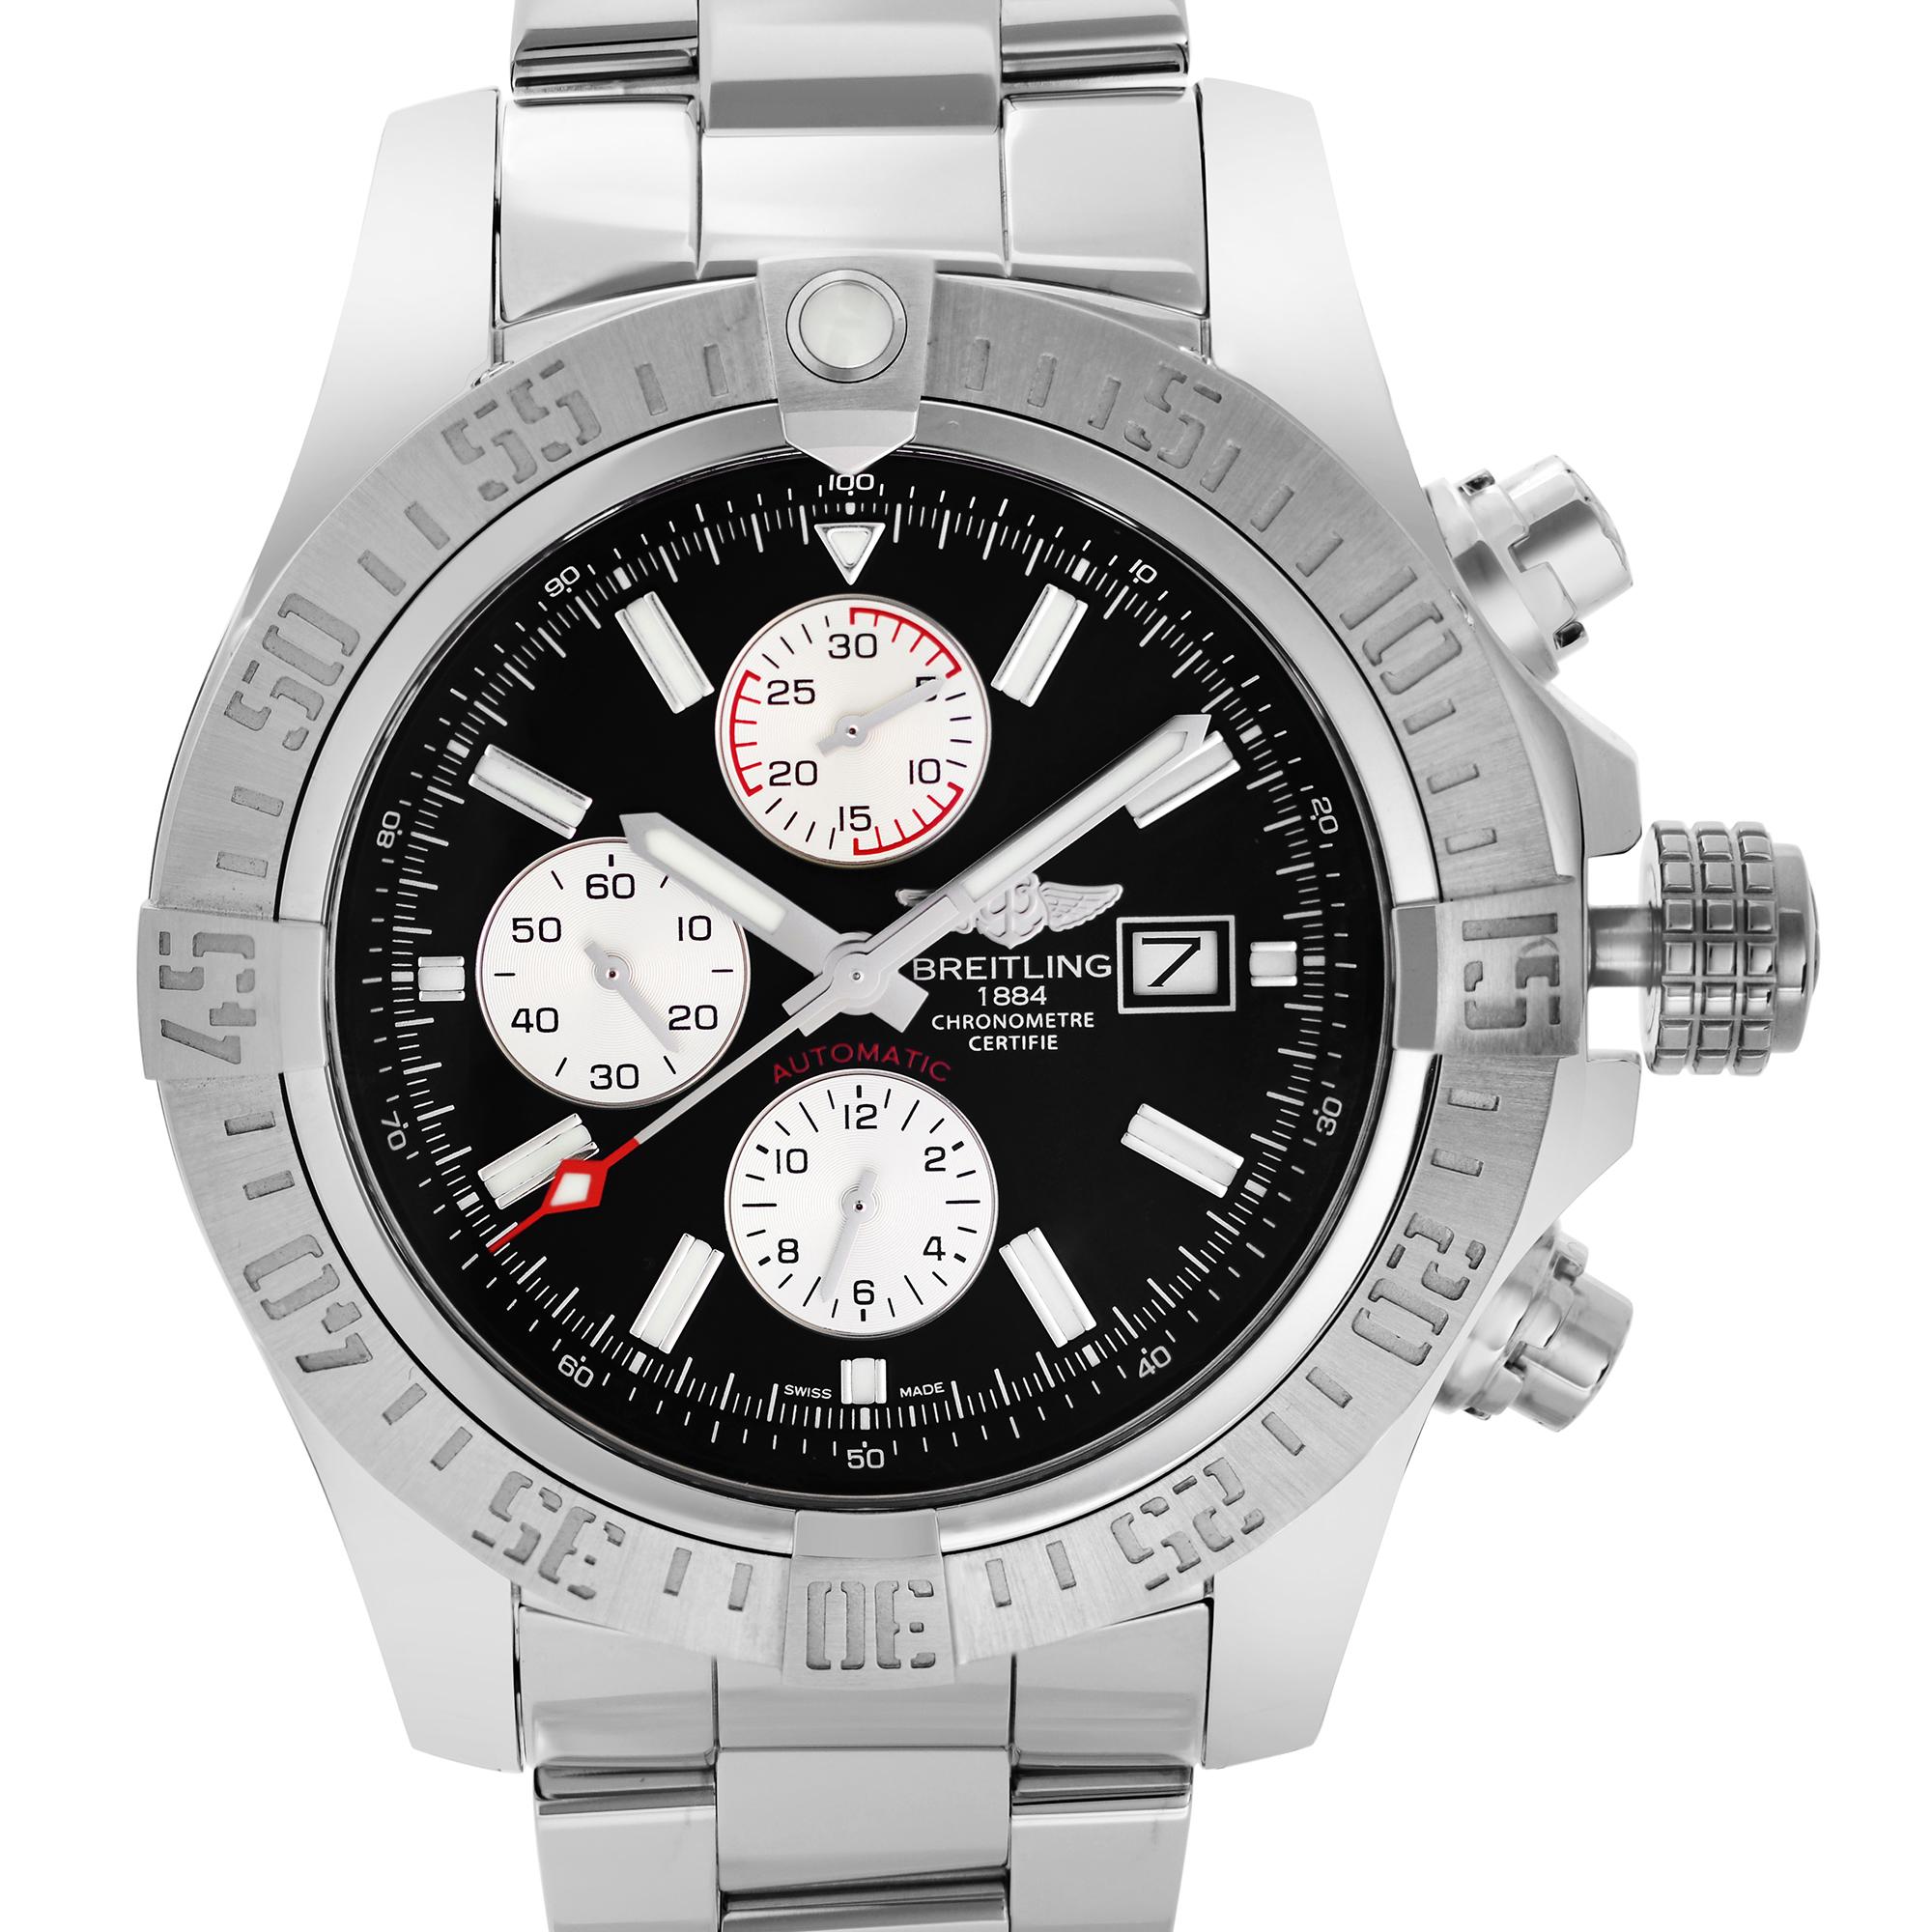 Unworn Breitling Super Avenger II Steel Black Dial Automatic Mens Watch. This Beautiful Timepiece Features: Stainless Steel Case with a Stainless Steel Bracelet, Rotating Stainless Steel Bezel, Black Dial with Index Hour Markers. Original Box and